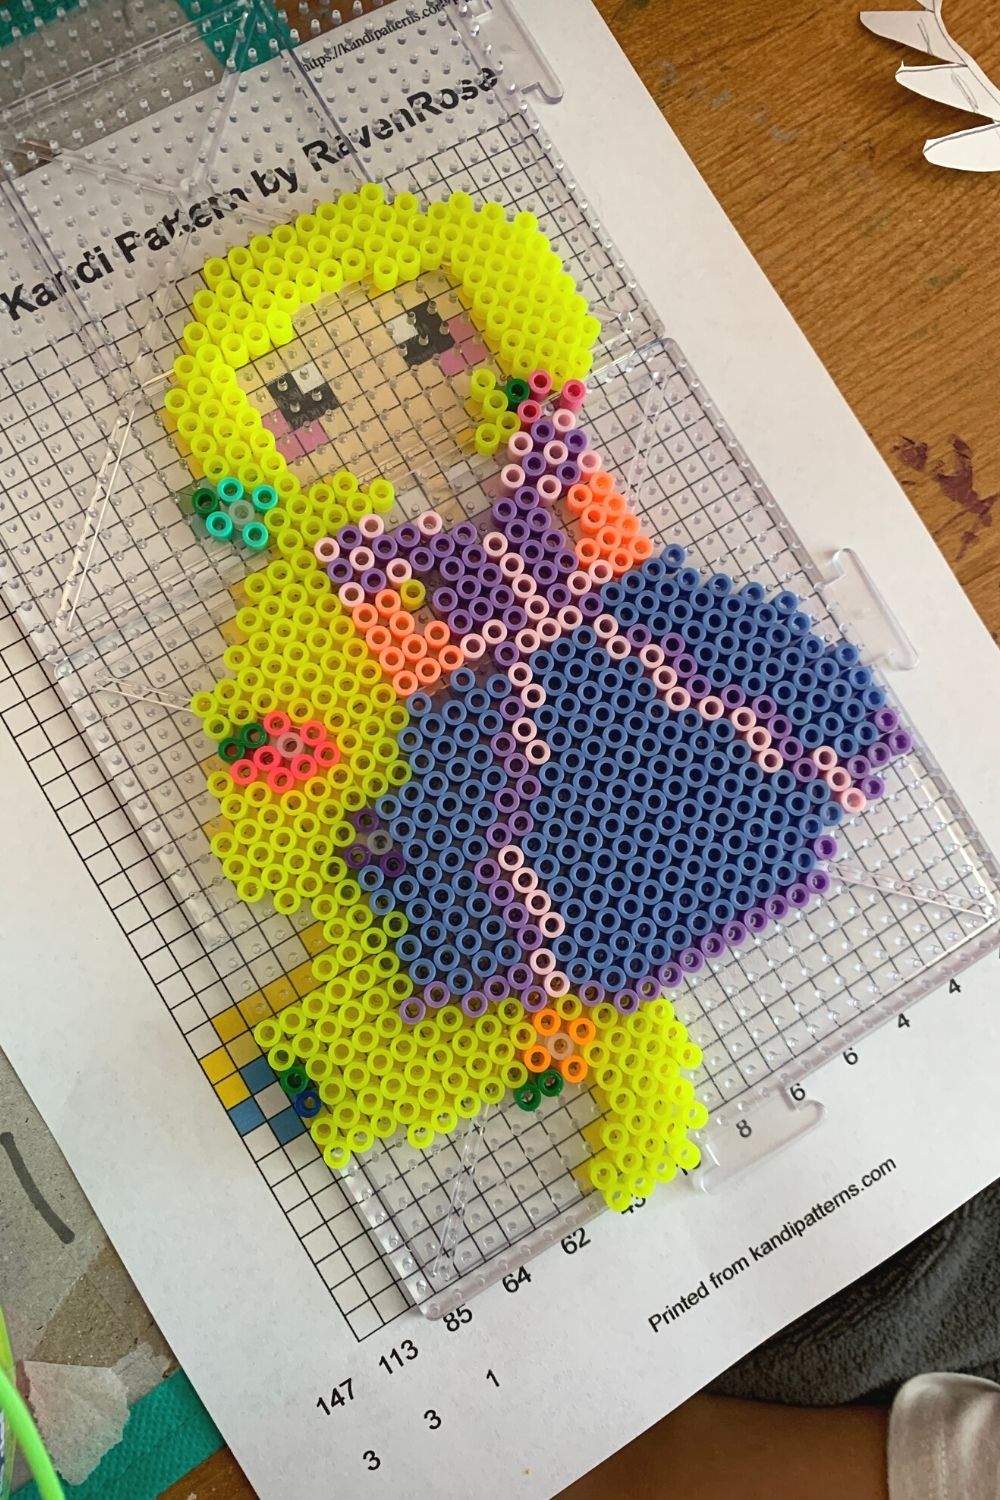 Rapunzel Perler bead design being constructed over a pattern for the Disney Princess